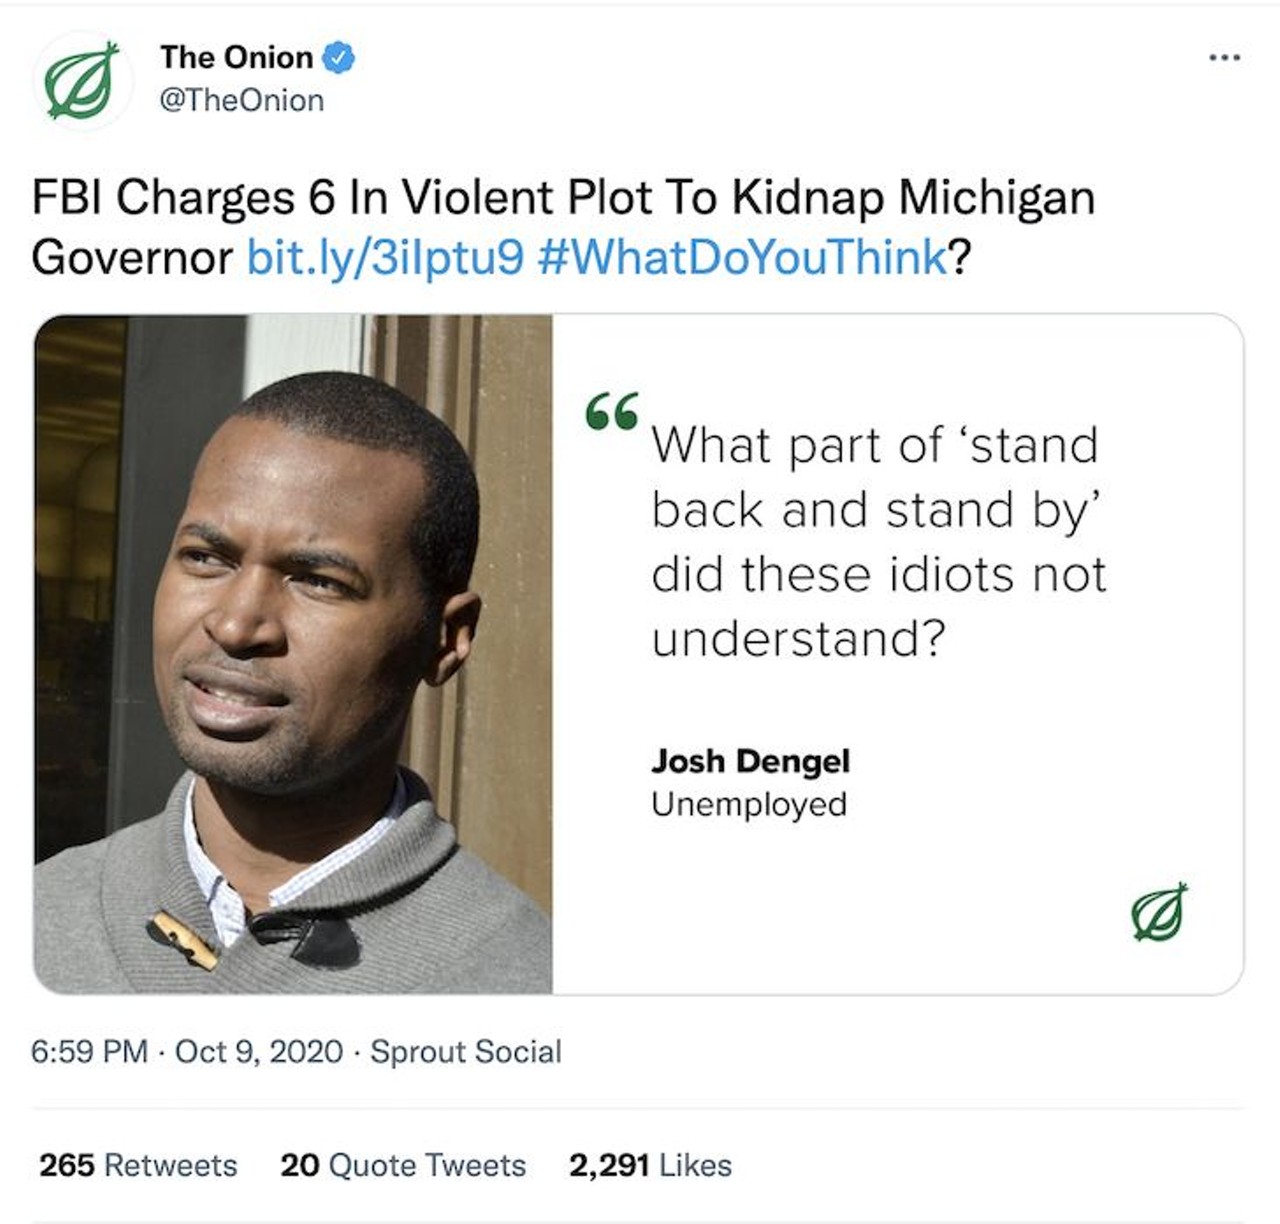 FBI Charges 6 In Violent Plot To Kidnap Michigan Governor
Six men are charged by the FBI in a plot to kidnap Michigan Governor Gretchen Whitmer. &#147;What part of &#145;stand back and stand by&#146; did these idiots not understand?&#148; Detroit resident Josh Dengel said.